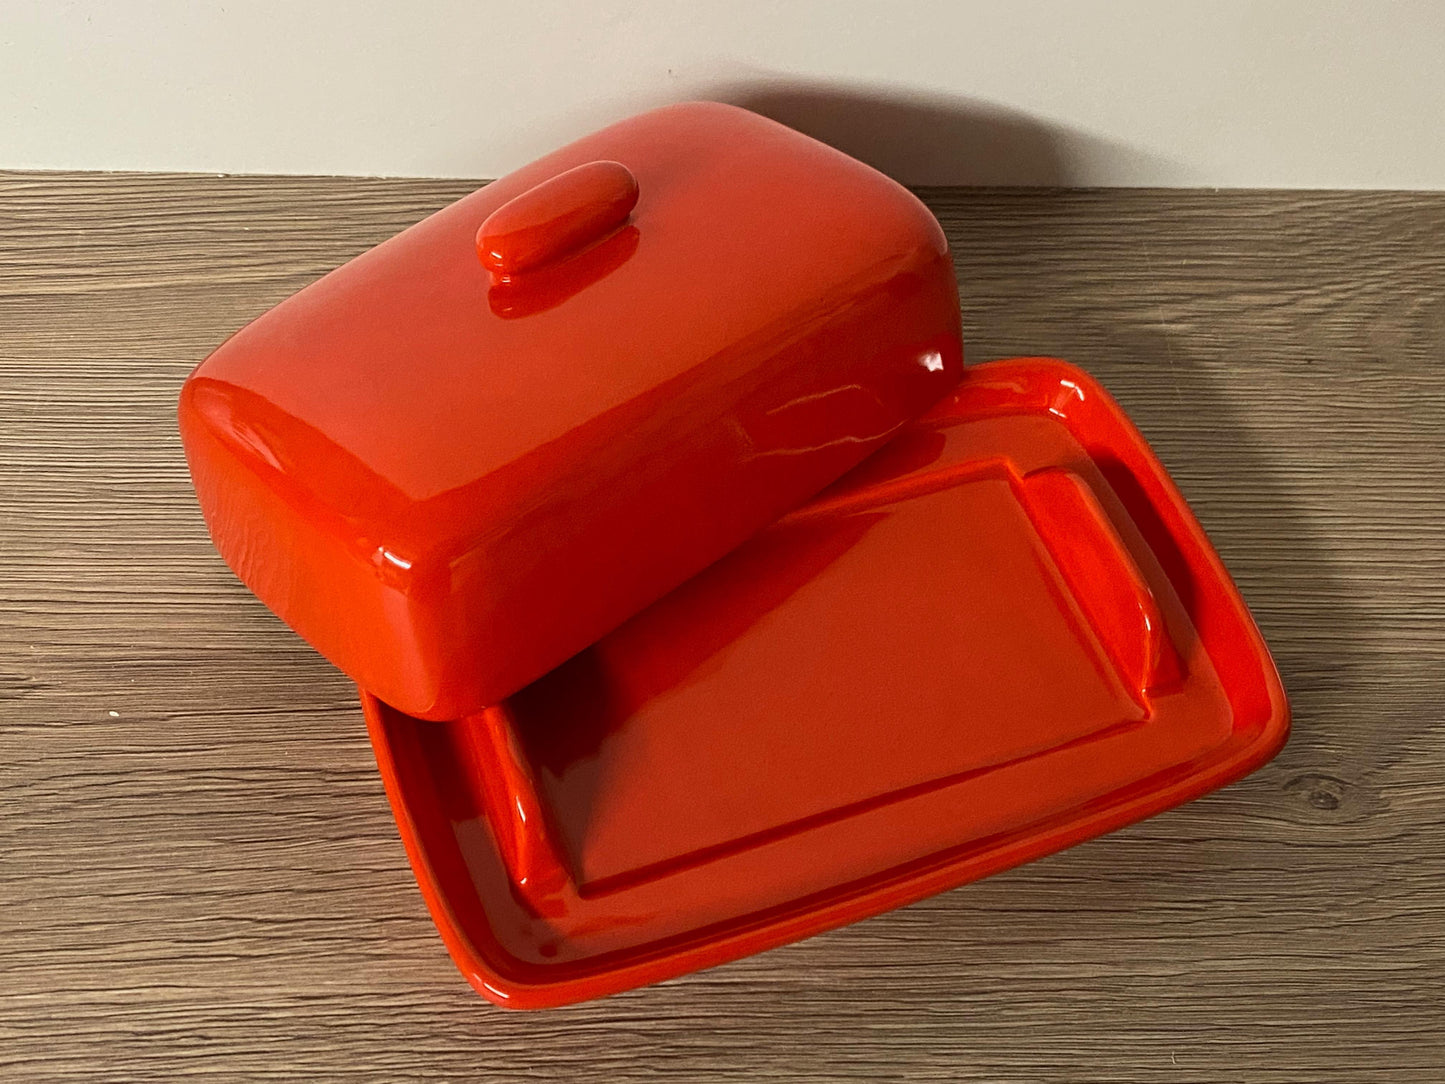 Red Butter Dish